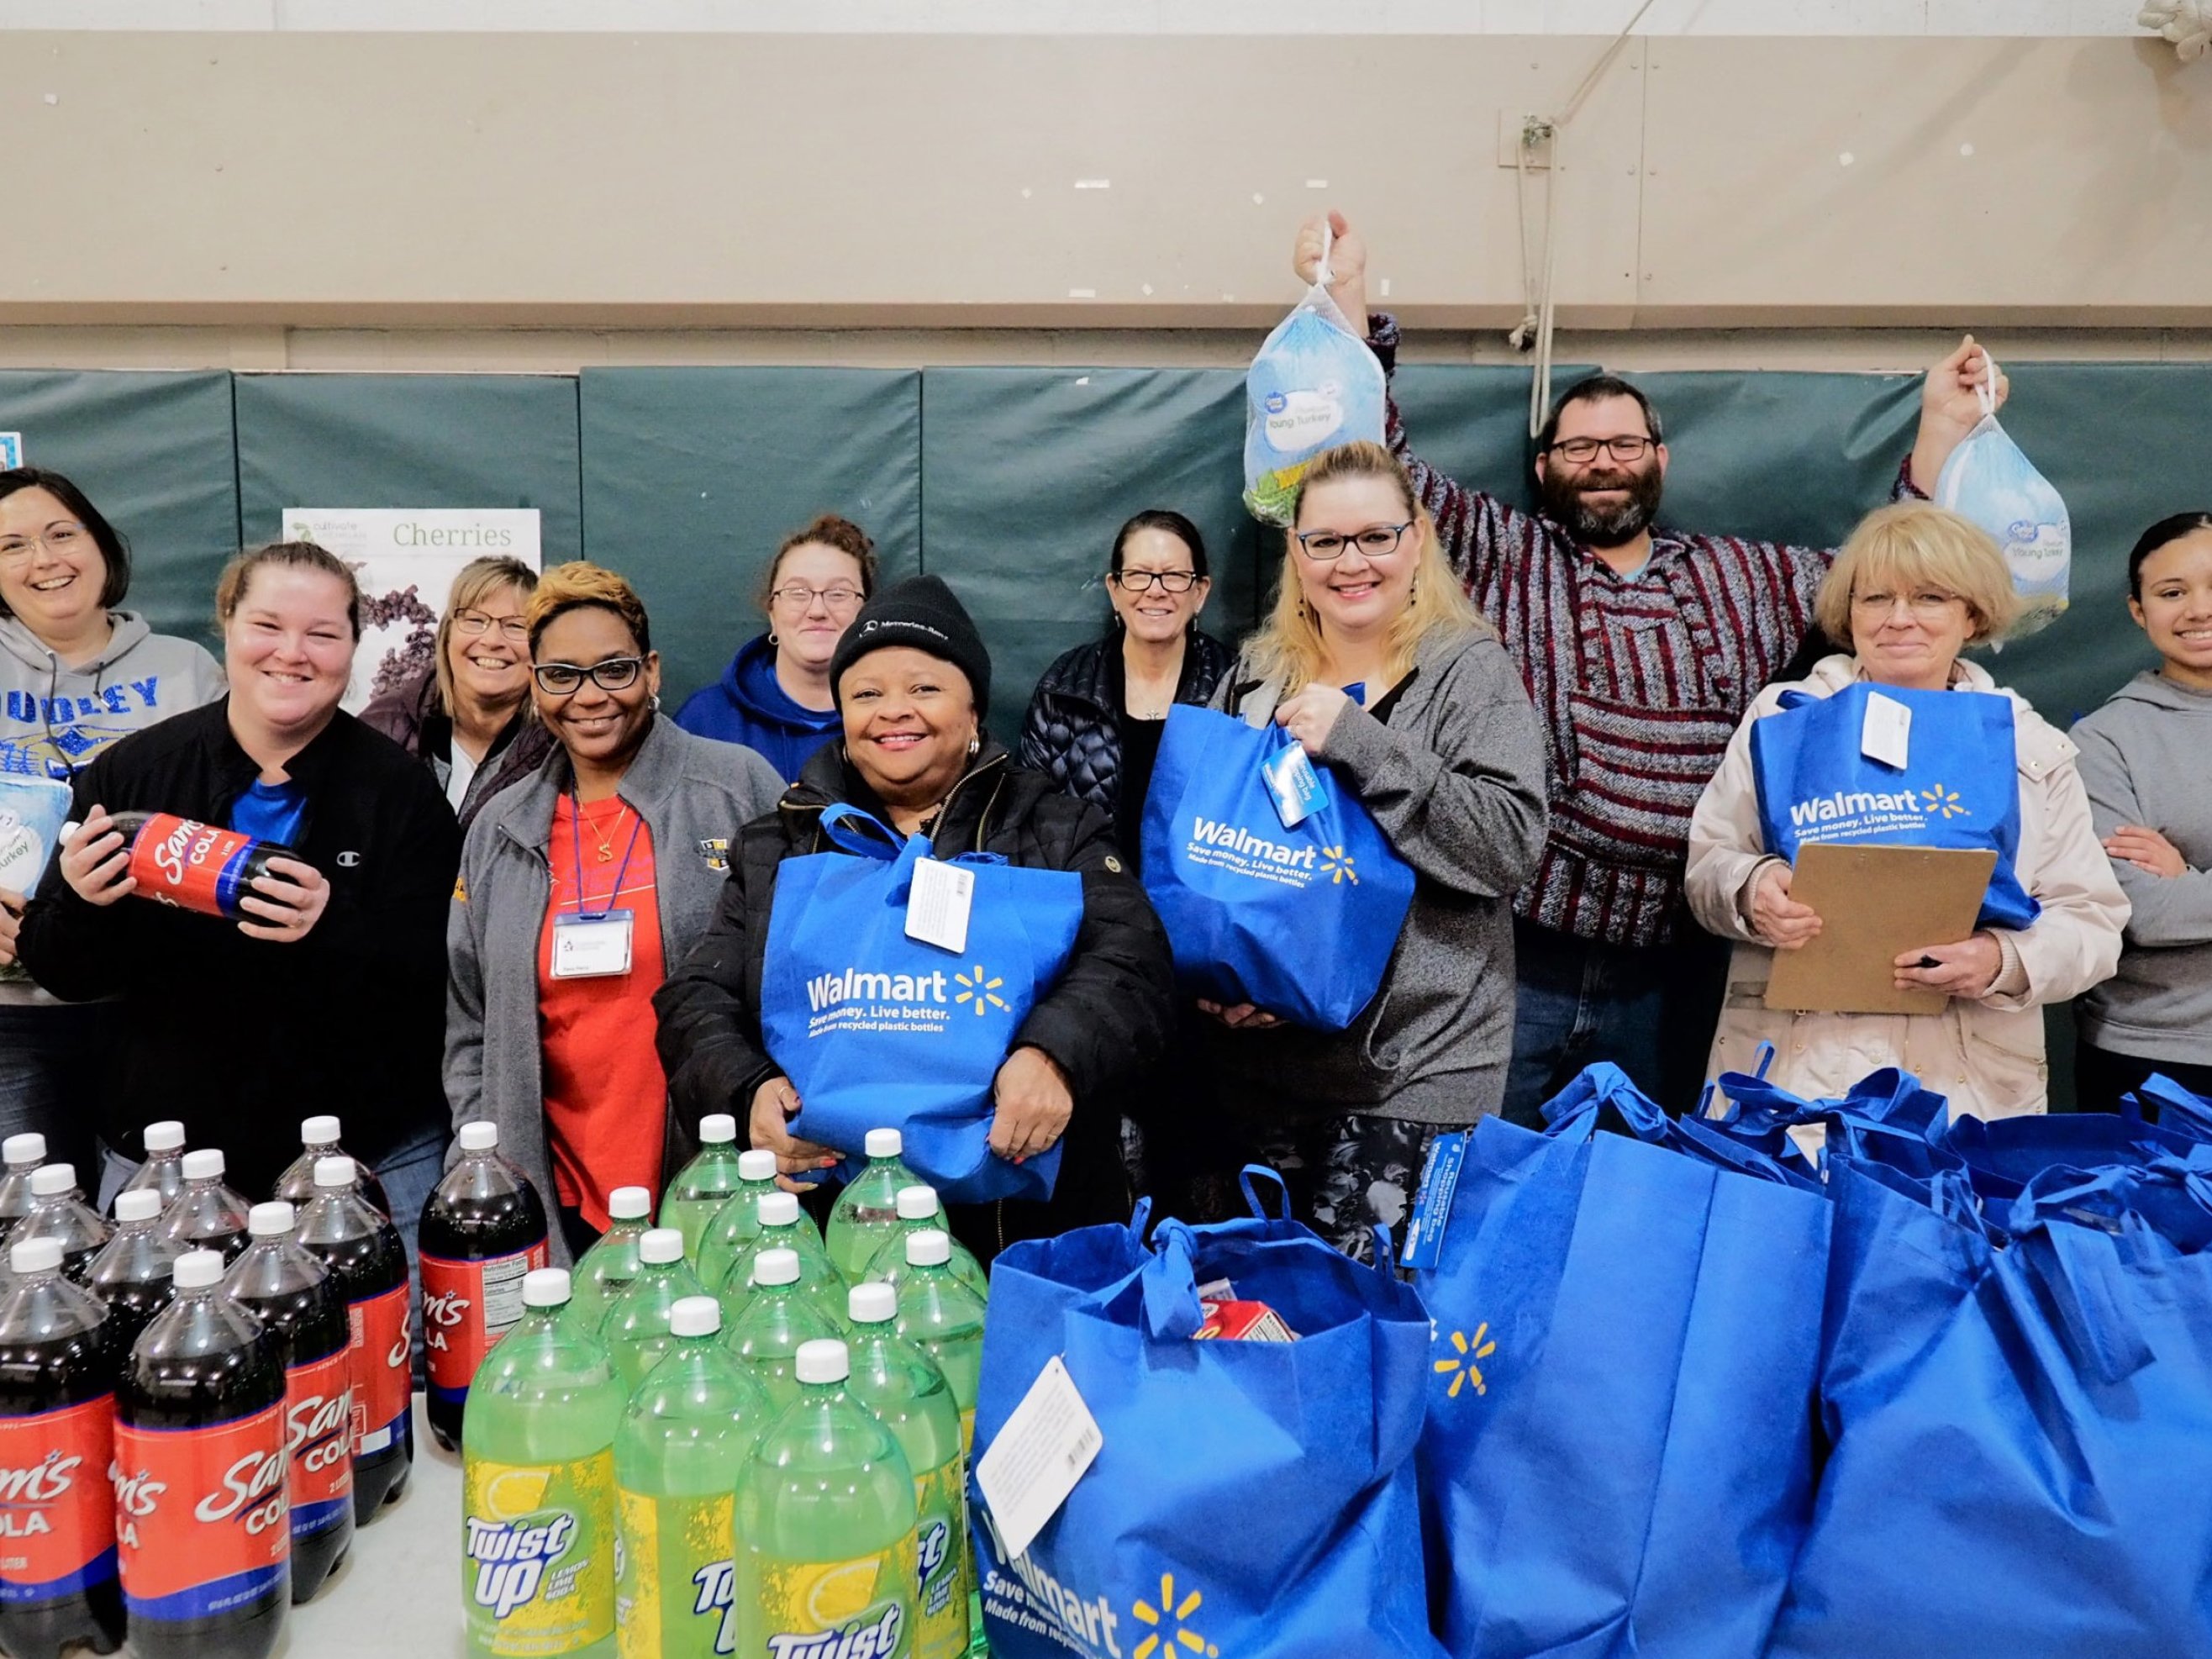 Over the holiday break, BCPS staff, students, families, our partners from Communities in Schools and several other local organizations worked together to distribute more than 150 meals to families in need. Pictured is the team at Dudley STEM on November 27.